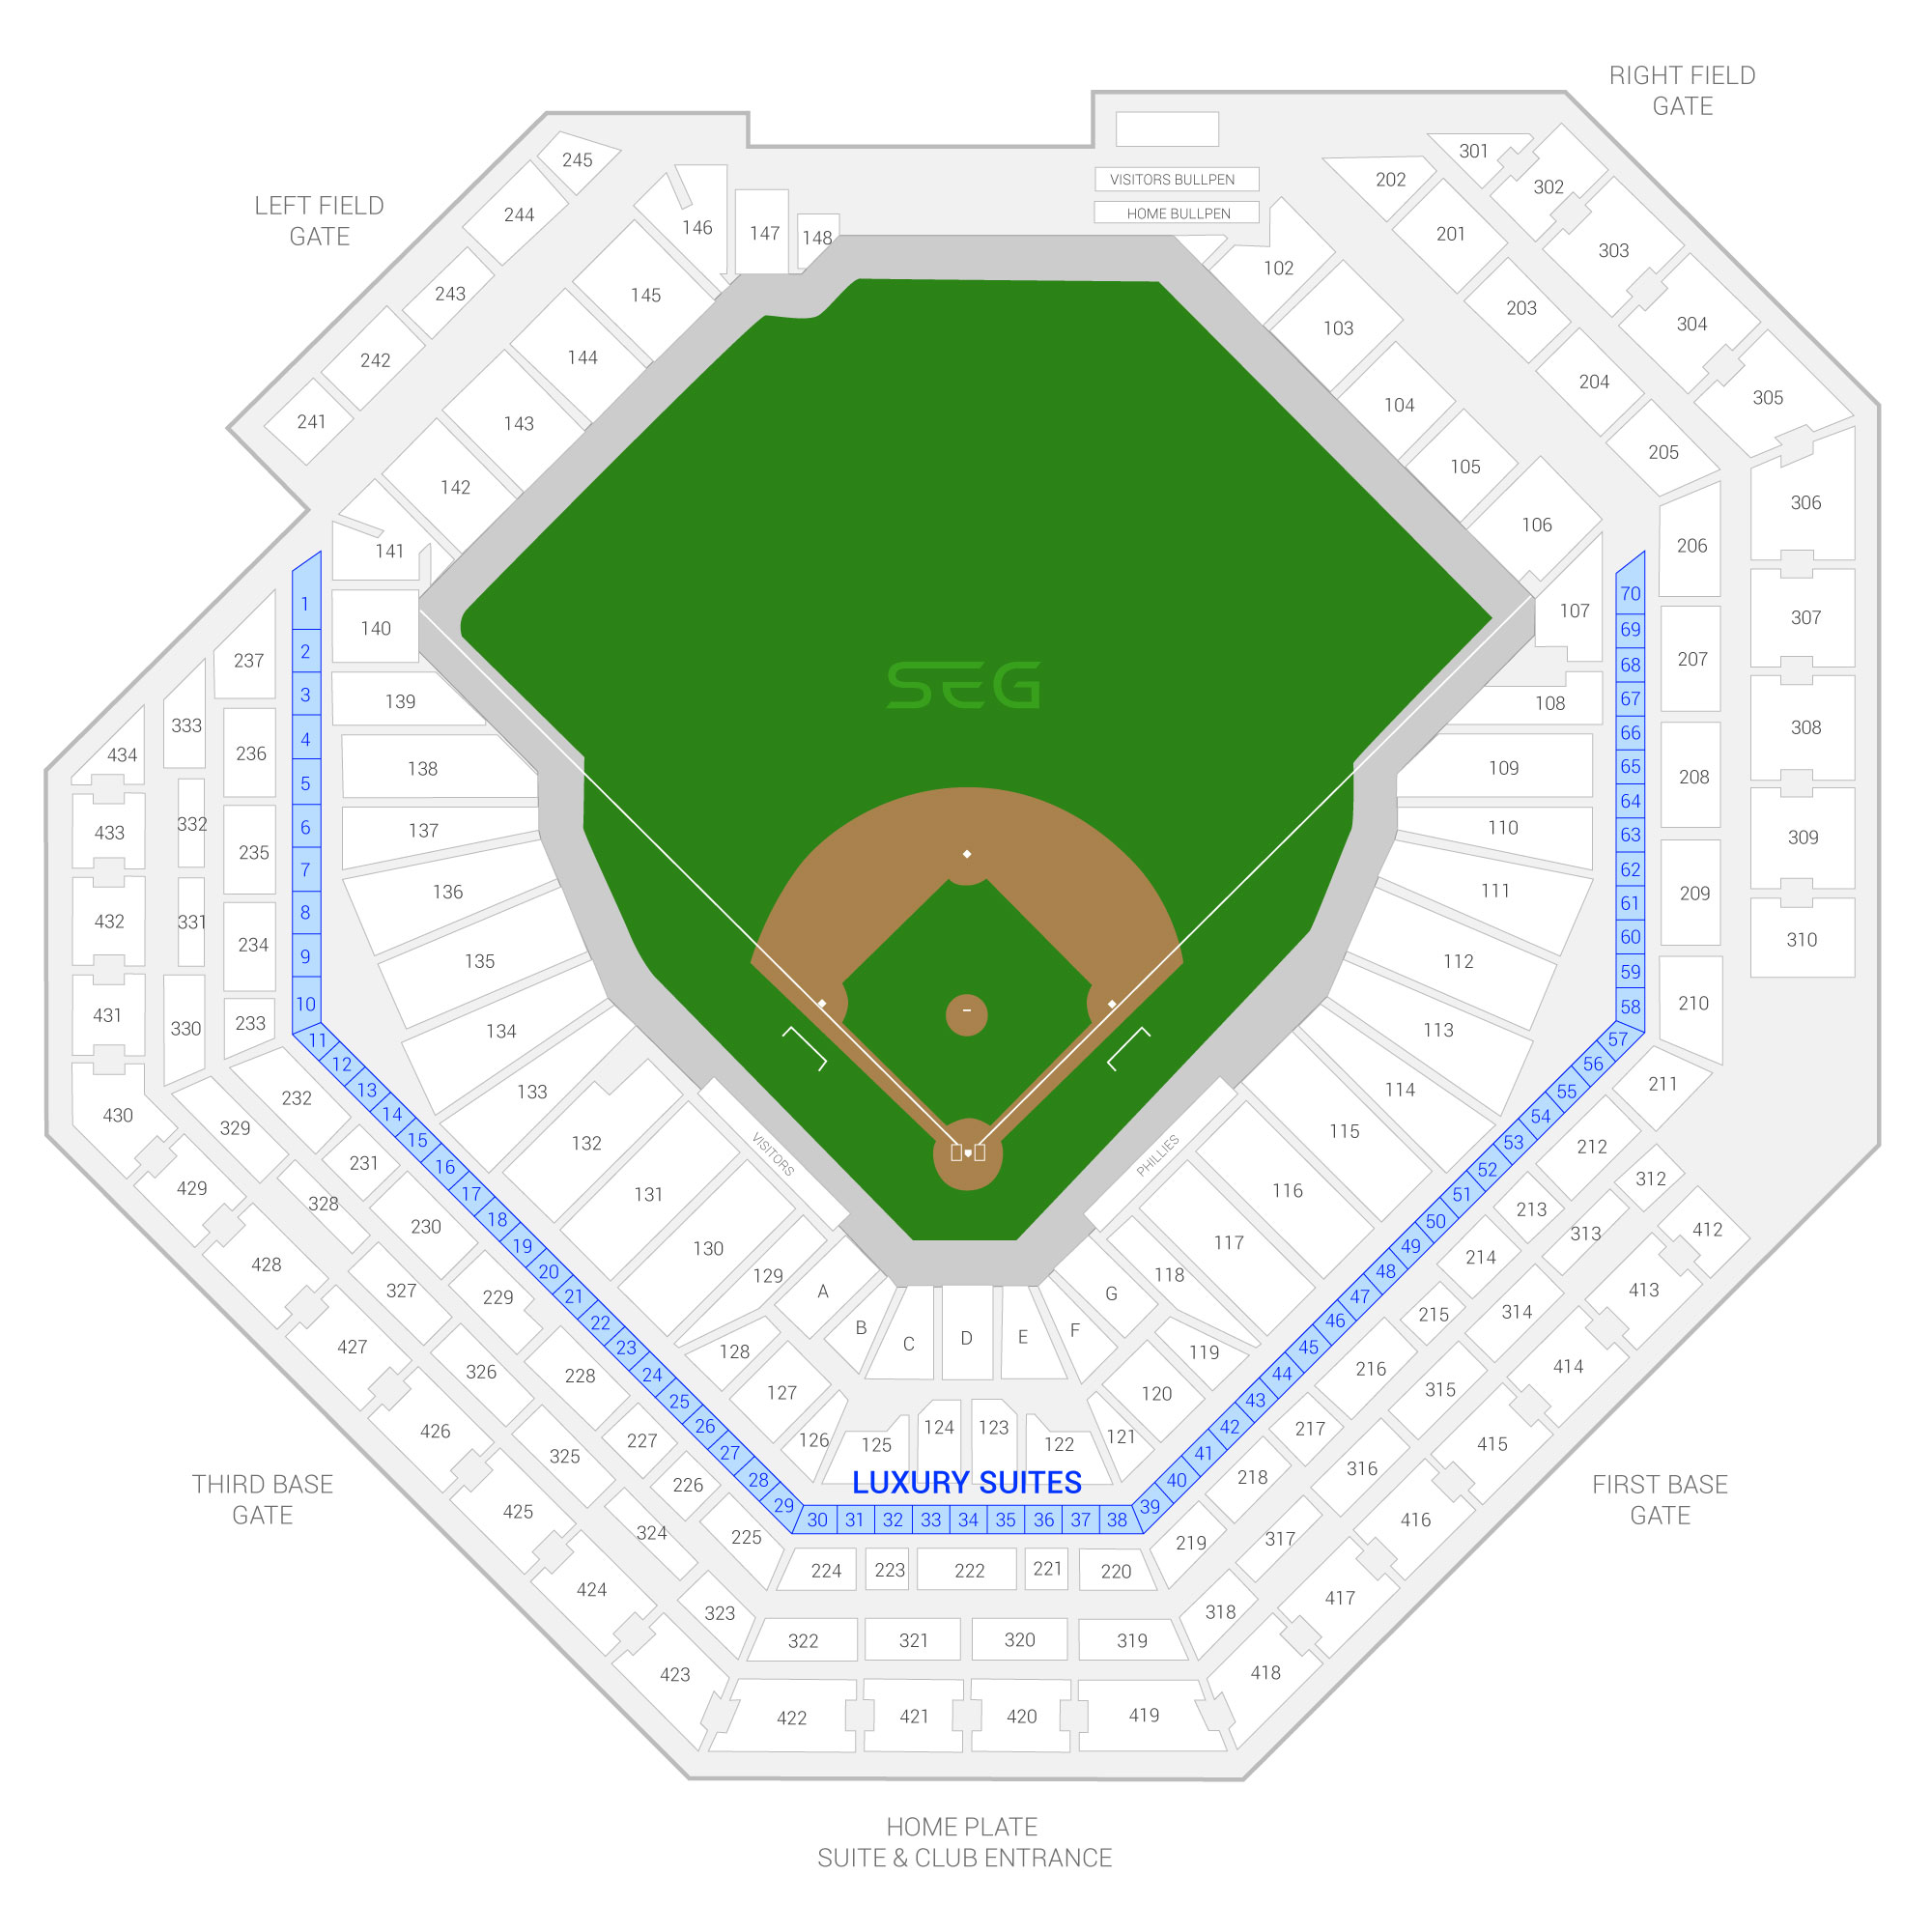 Citizens Bank Park / Philadelphia Phillies Suite Map and Seating Chart